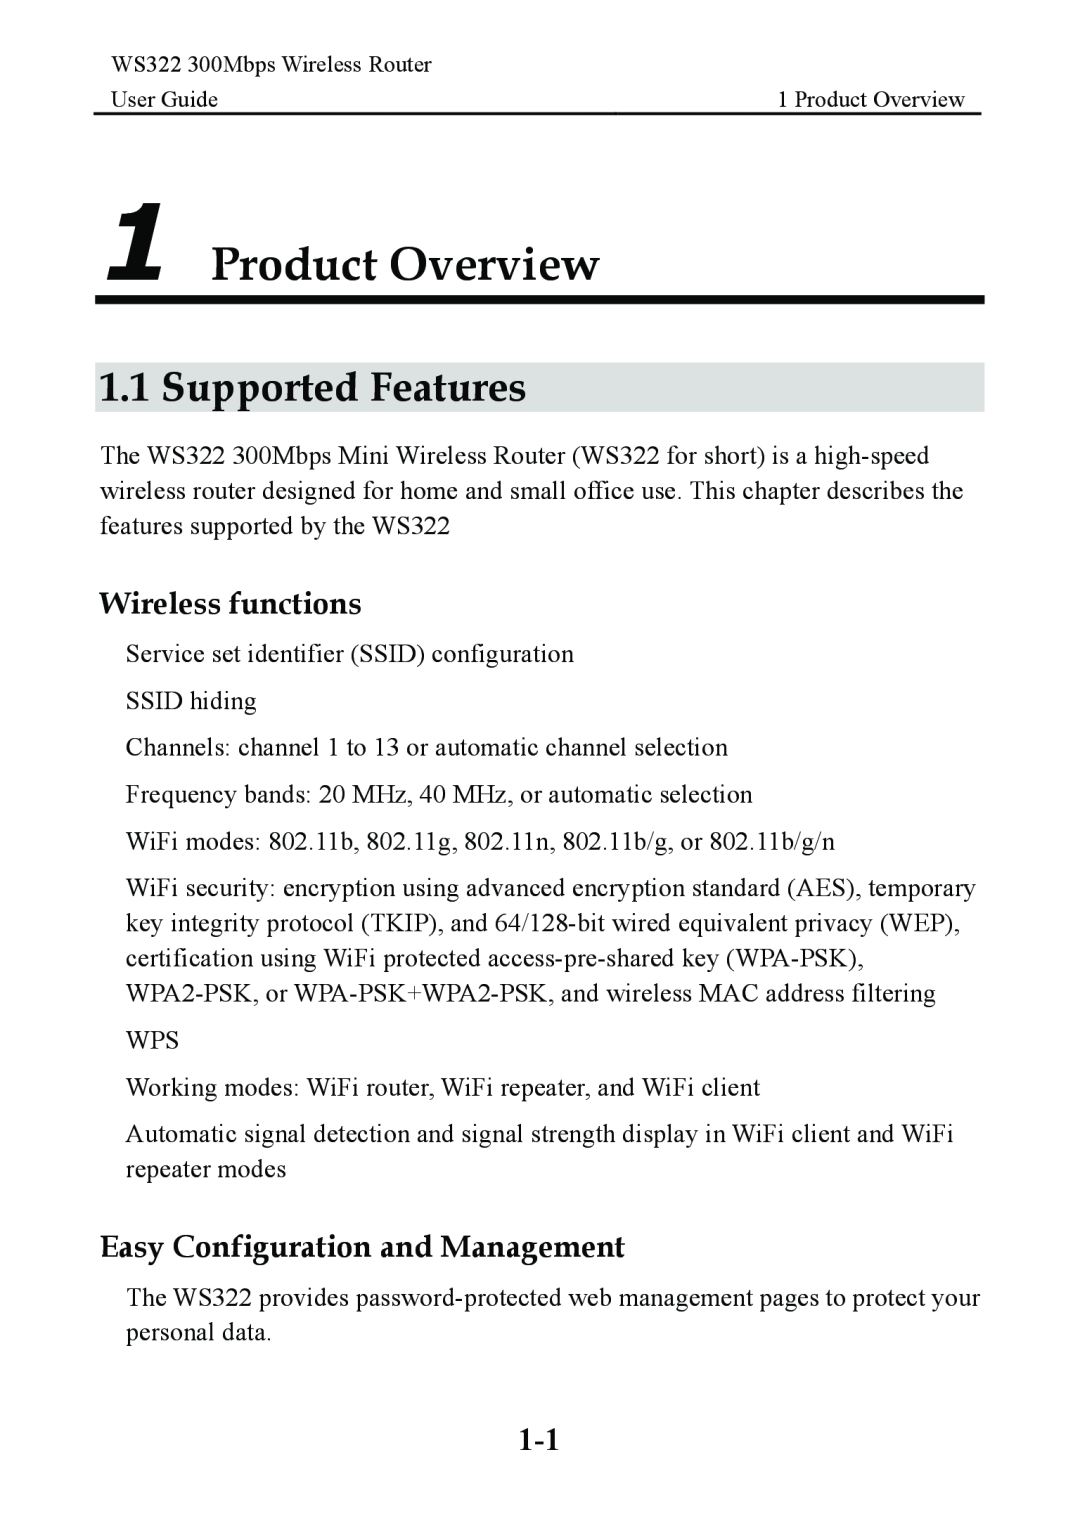 Huawei WS322 manual Product Overview, Supported Features, Wireless functions, Easy Configuration and Management 